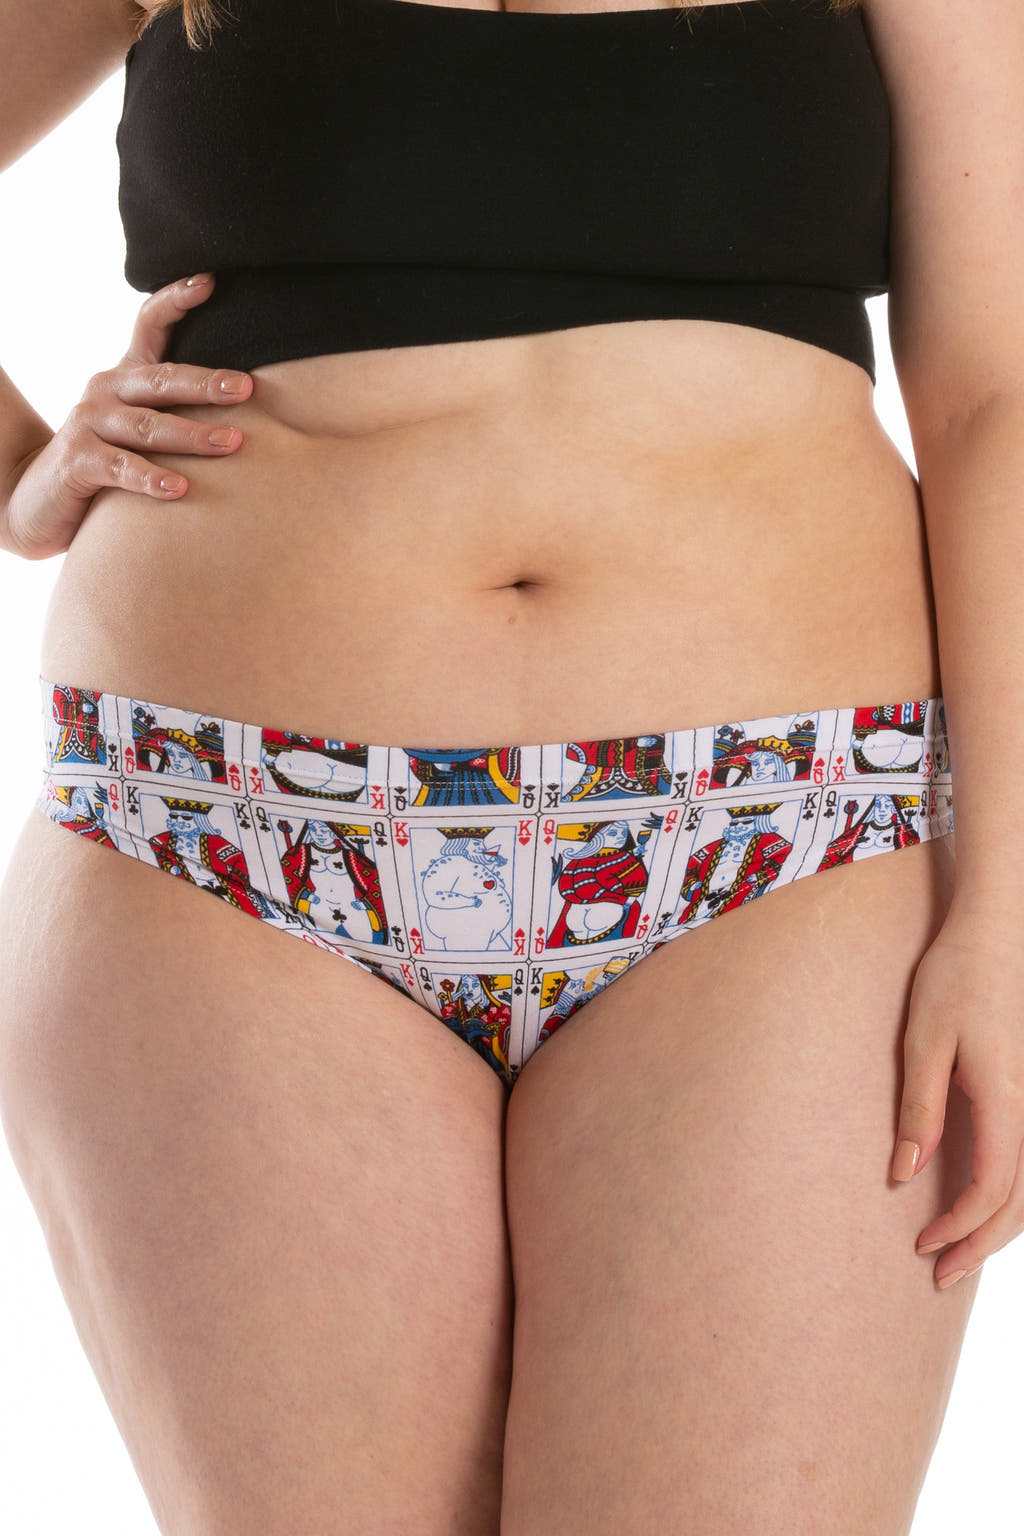 women's underwear printed with playing cards